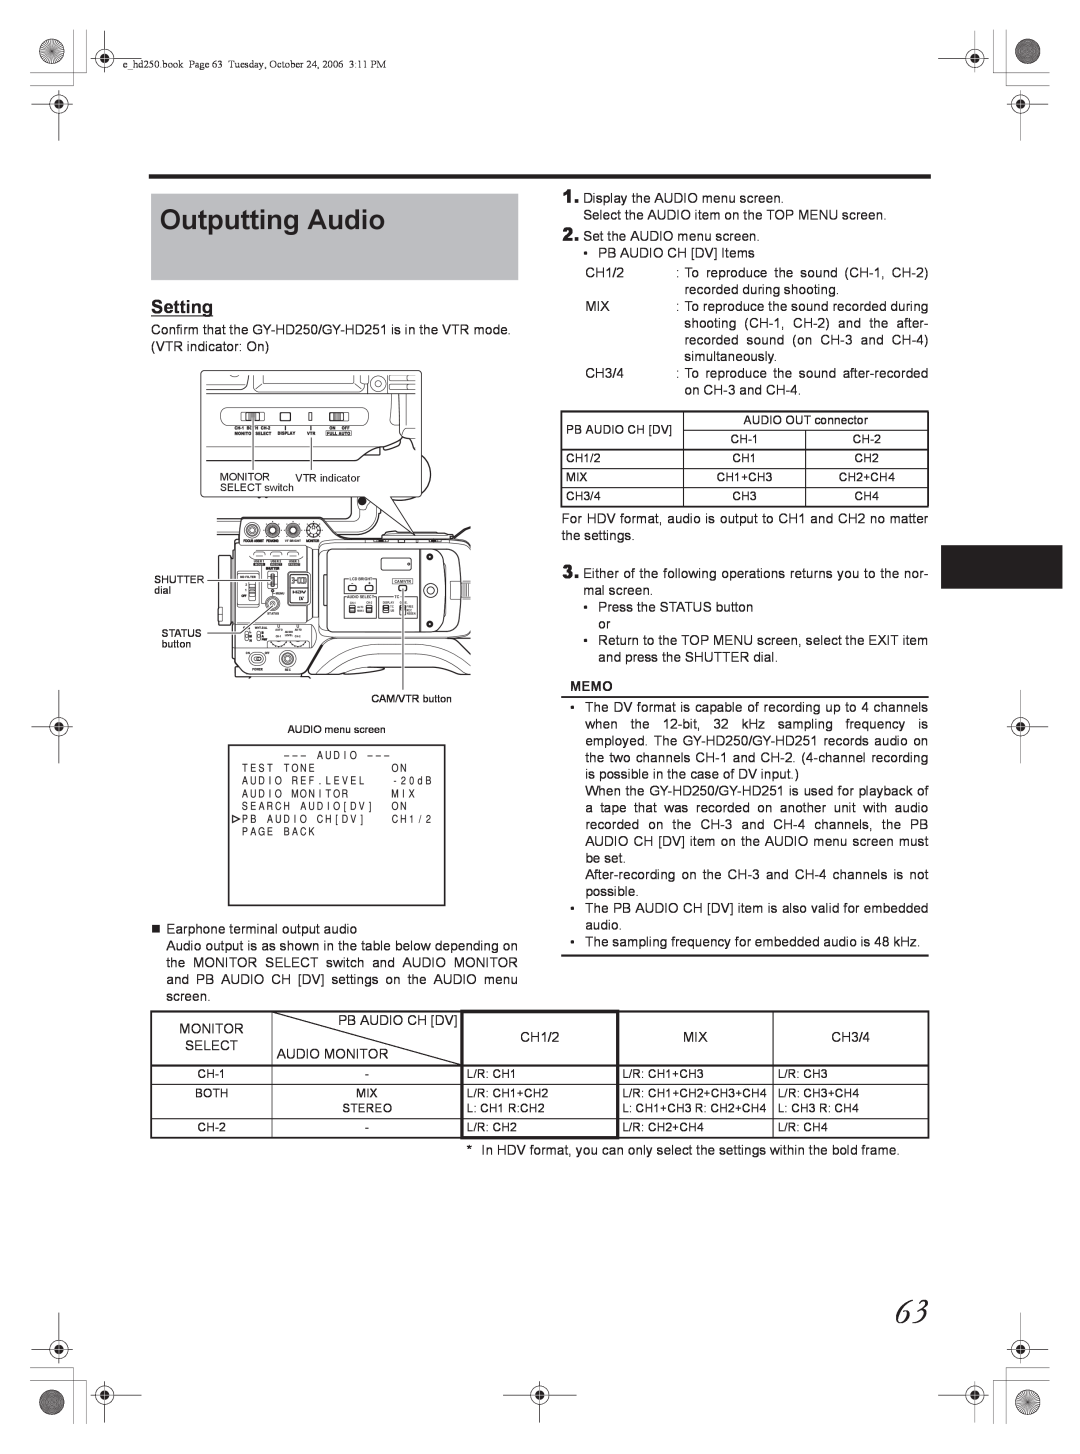 JVC GY-HD251, GY-HD250 manual Outputting Audio, Setting, Memo, ehd250.book Page 63 Tuesday, October 24, 2006 311 PM 